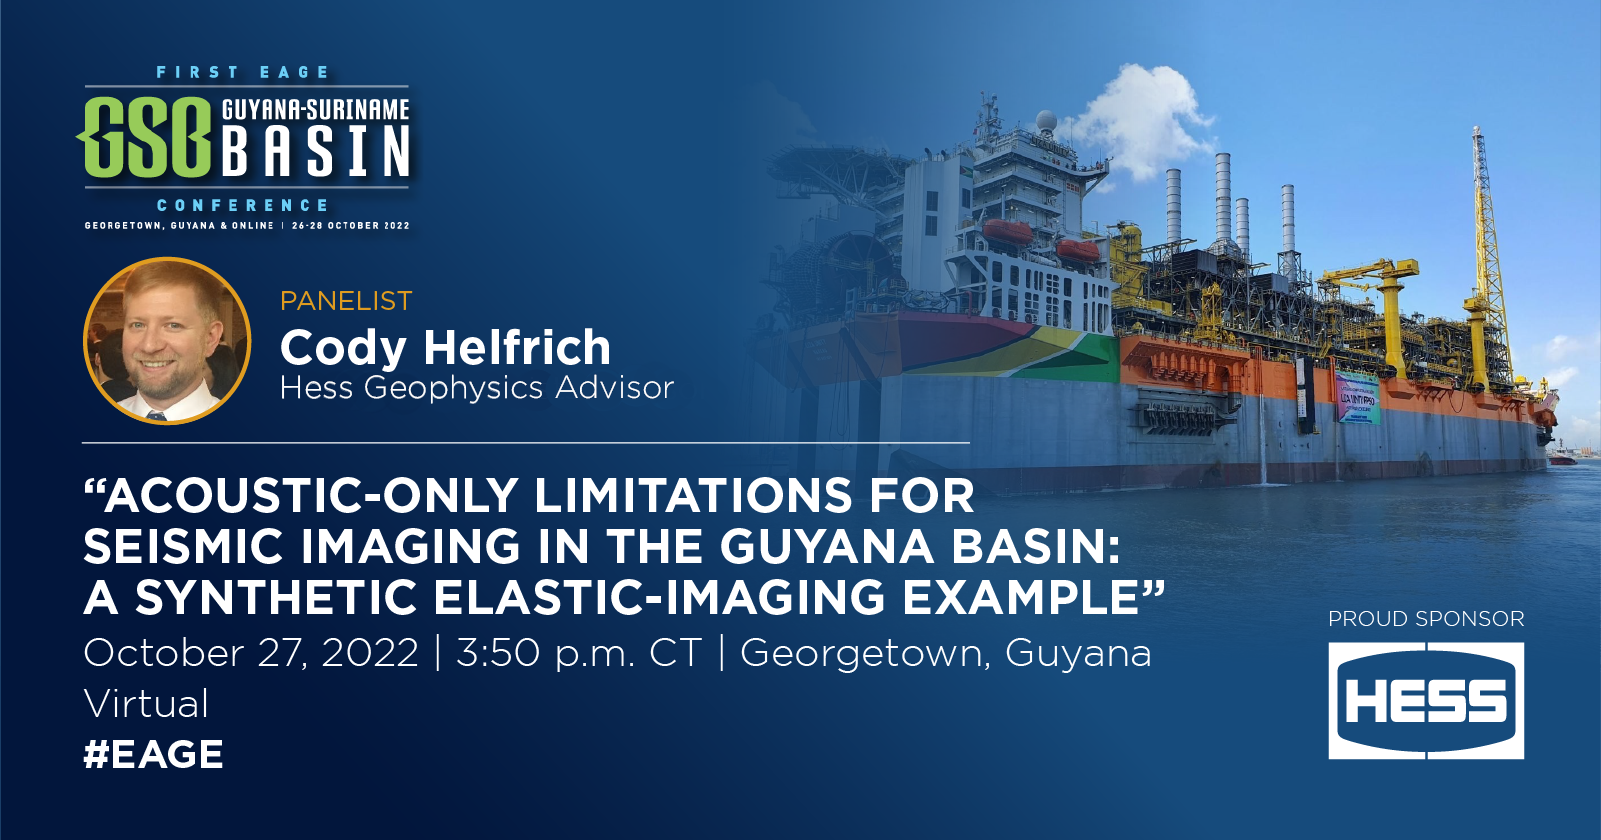 Cody Helfrich Panelist at EAGE Guyana-Suriname Basin Conference